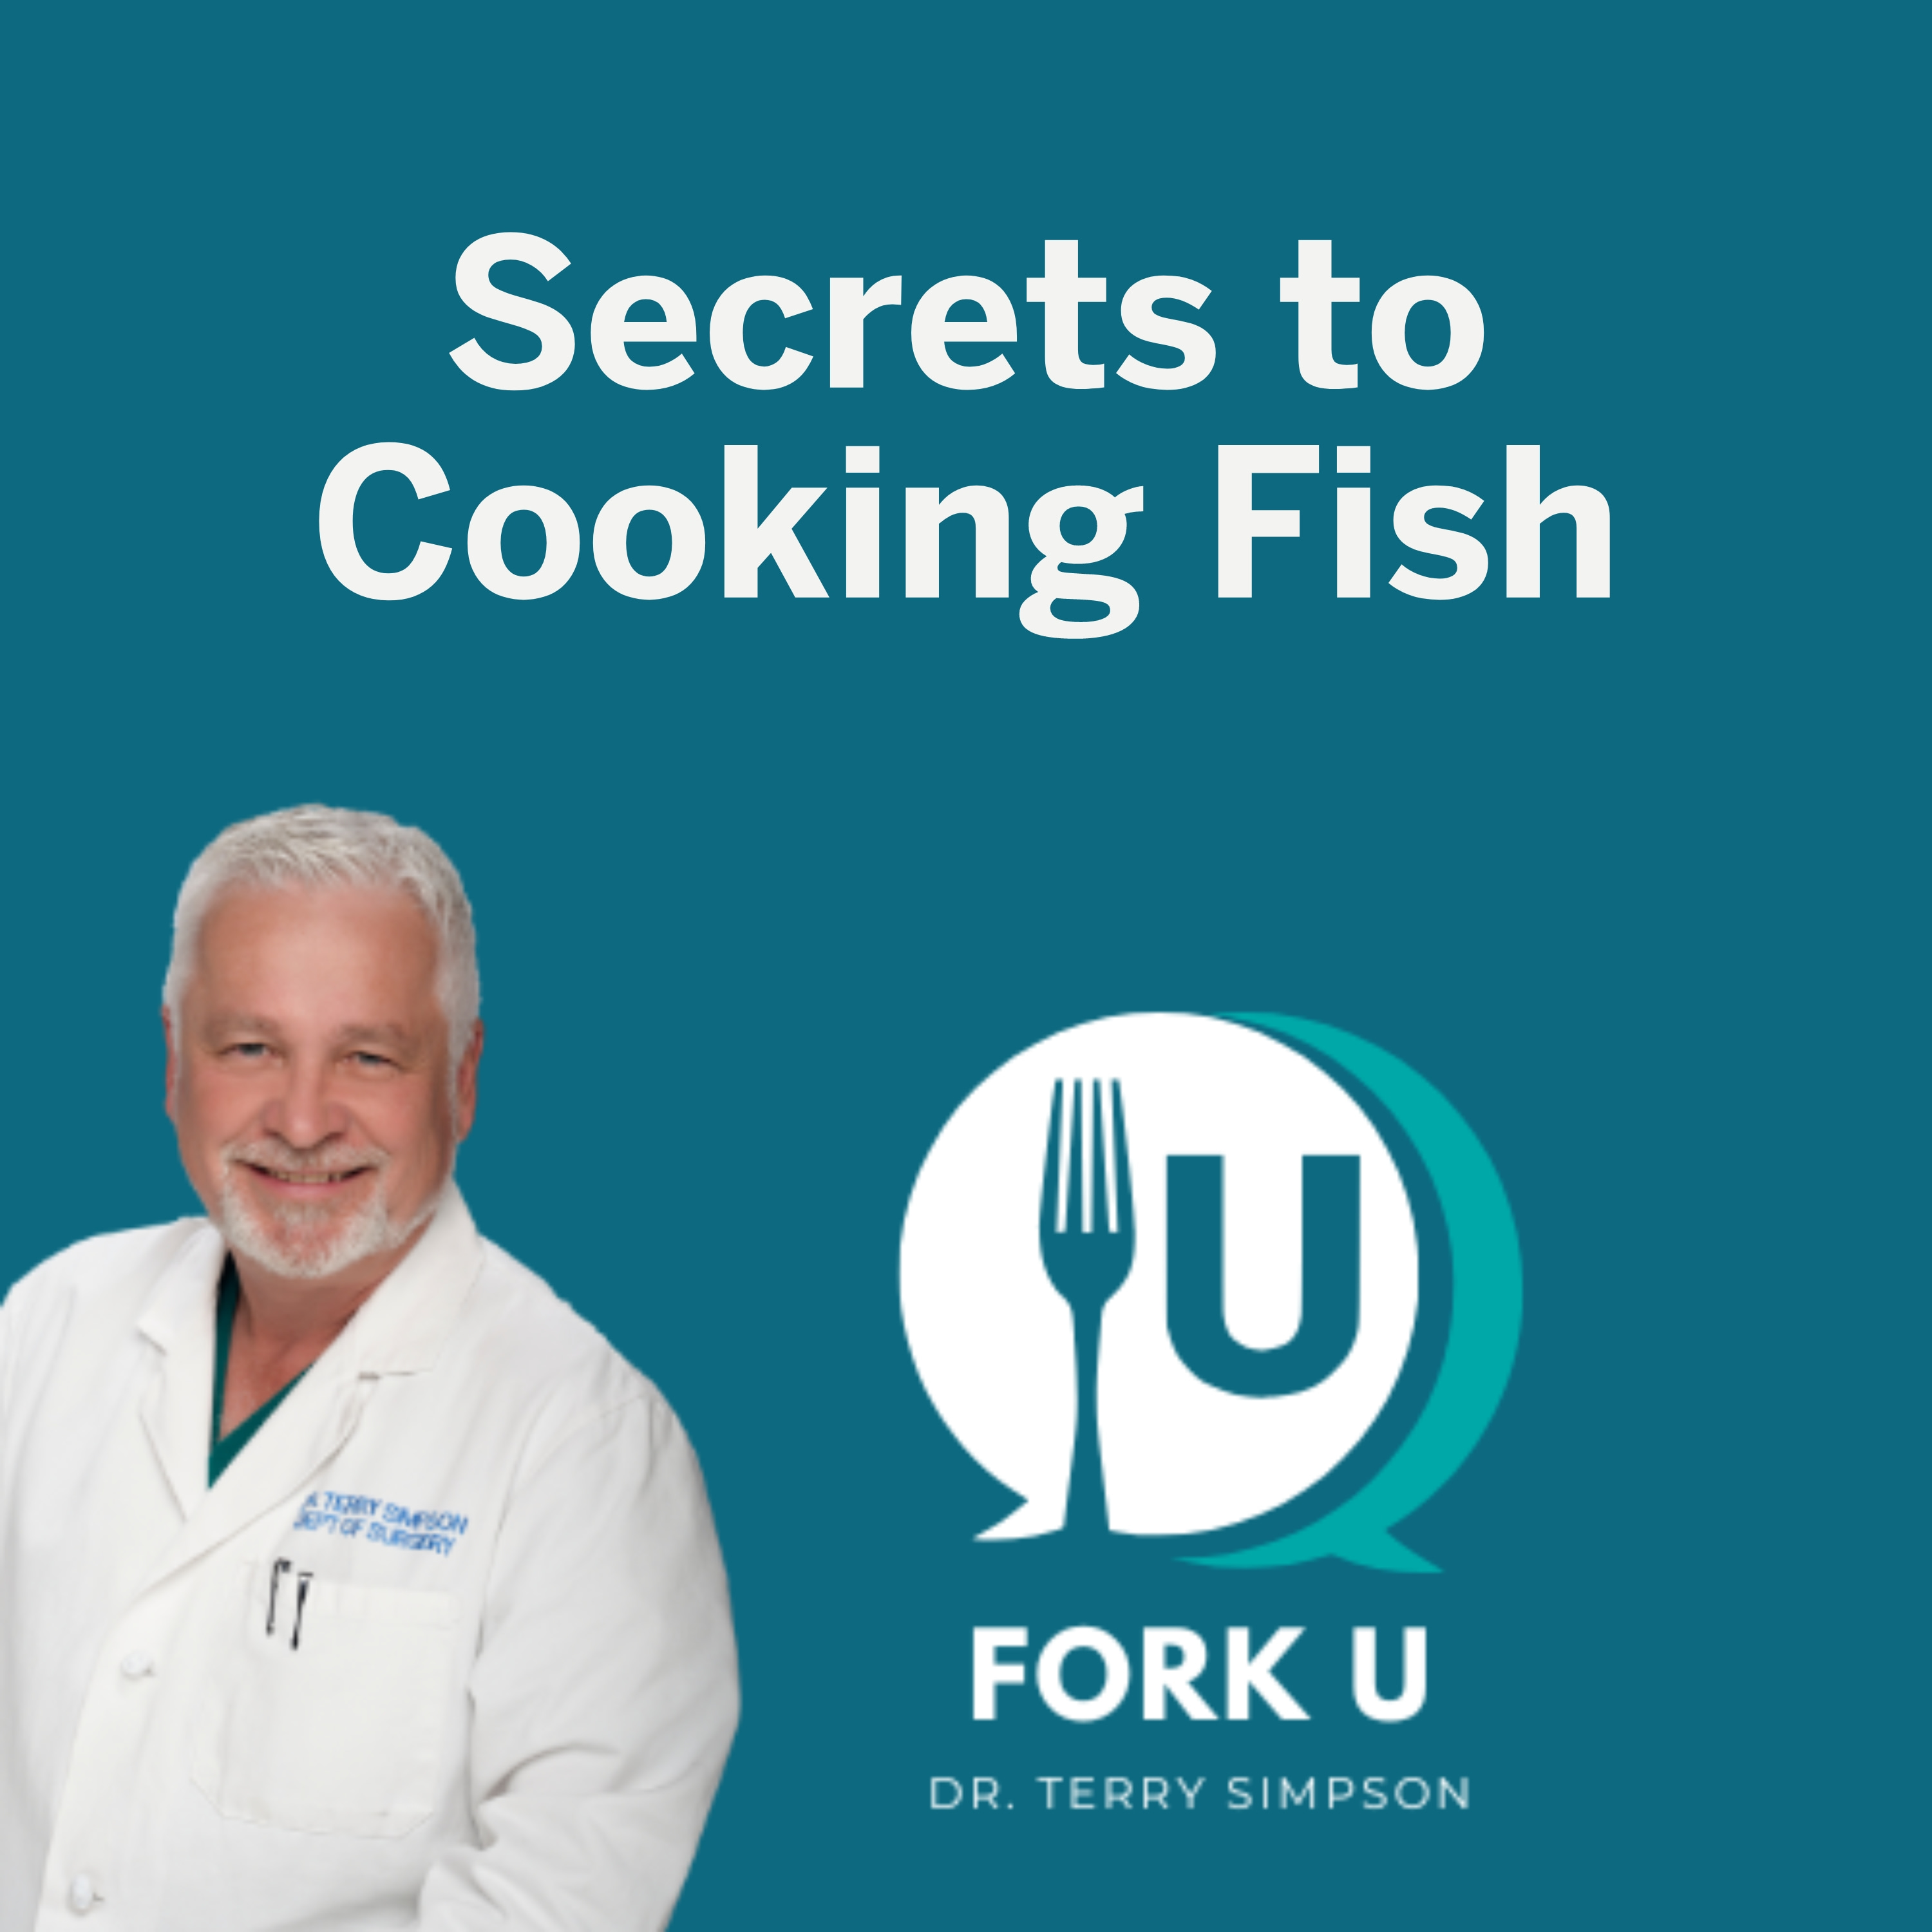 Secrets to Cooking Fish